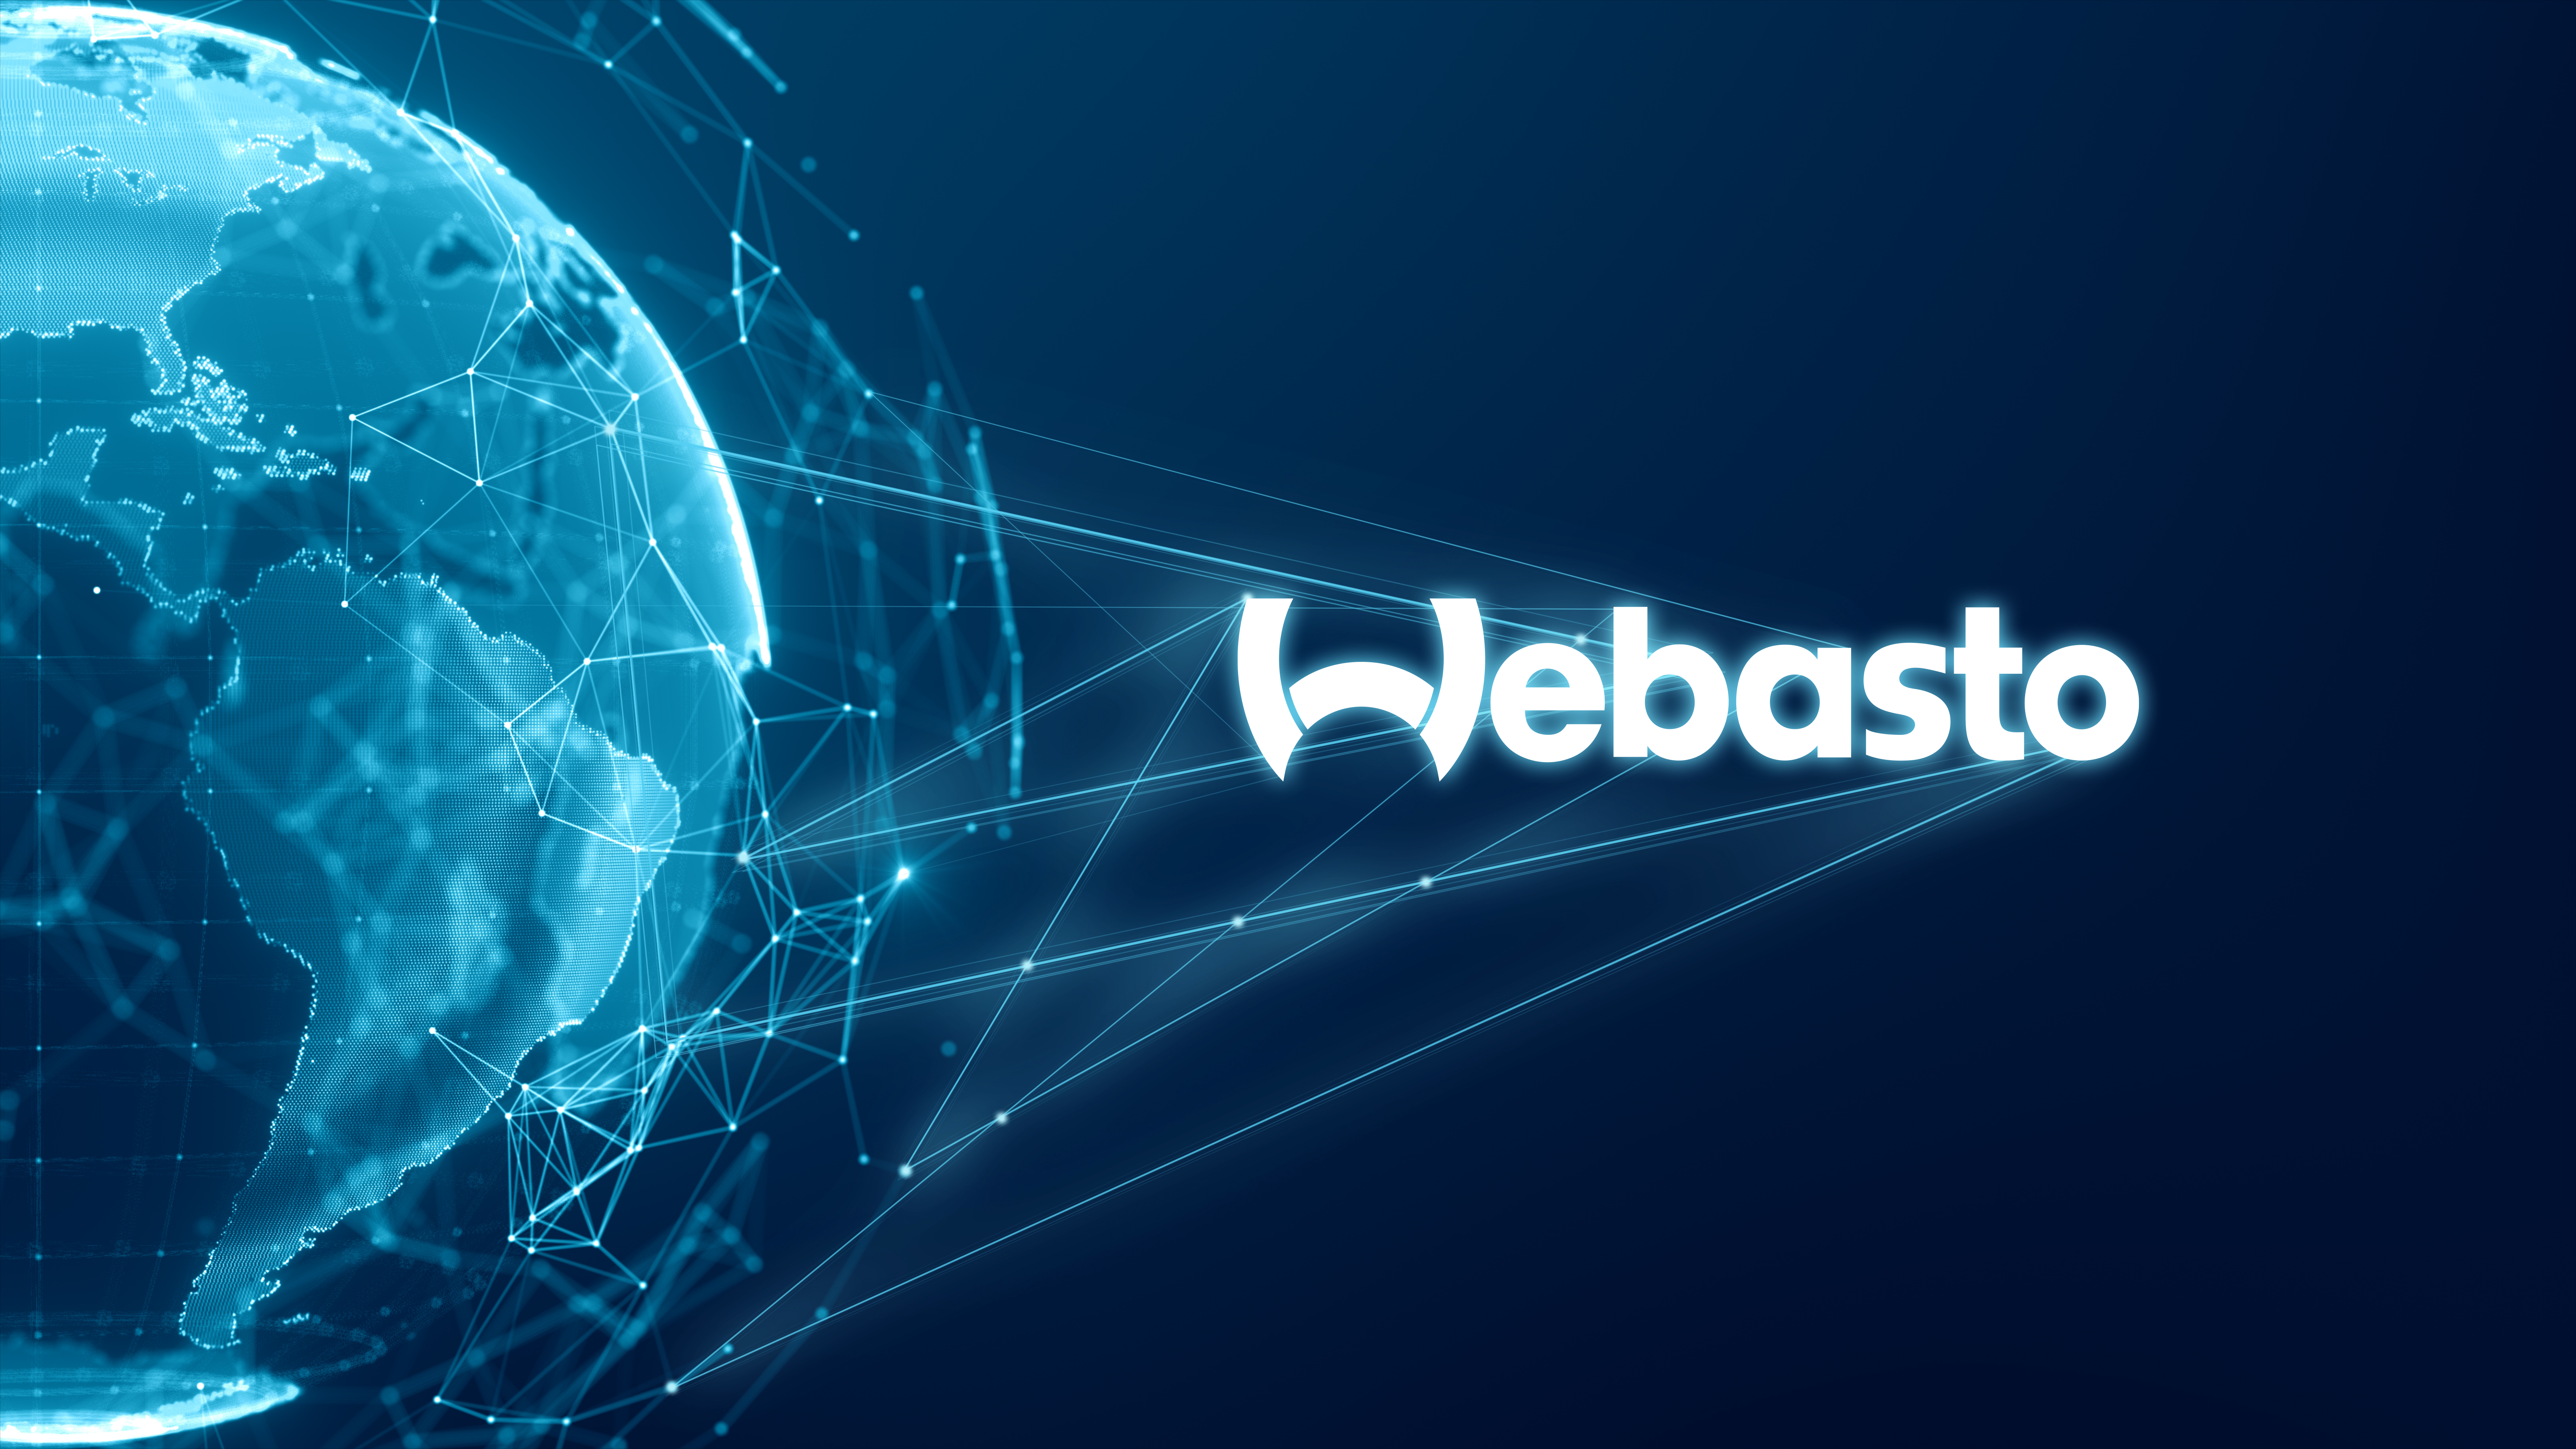 Webasto - Reiable partner to the automotive industry